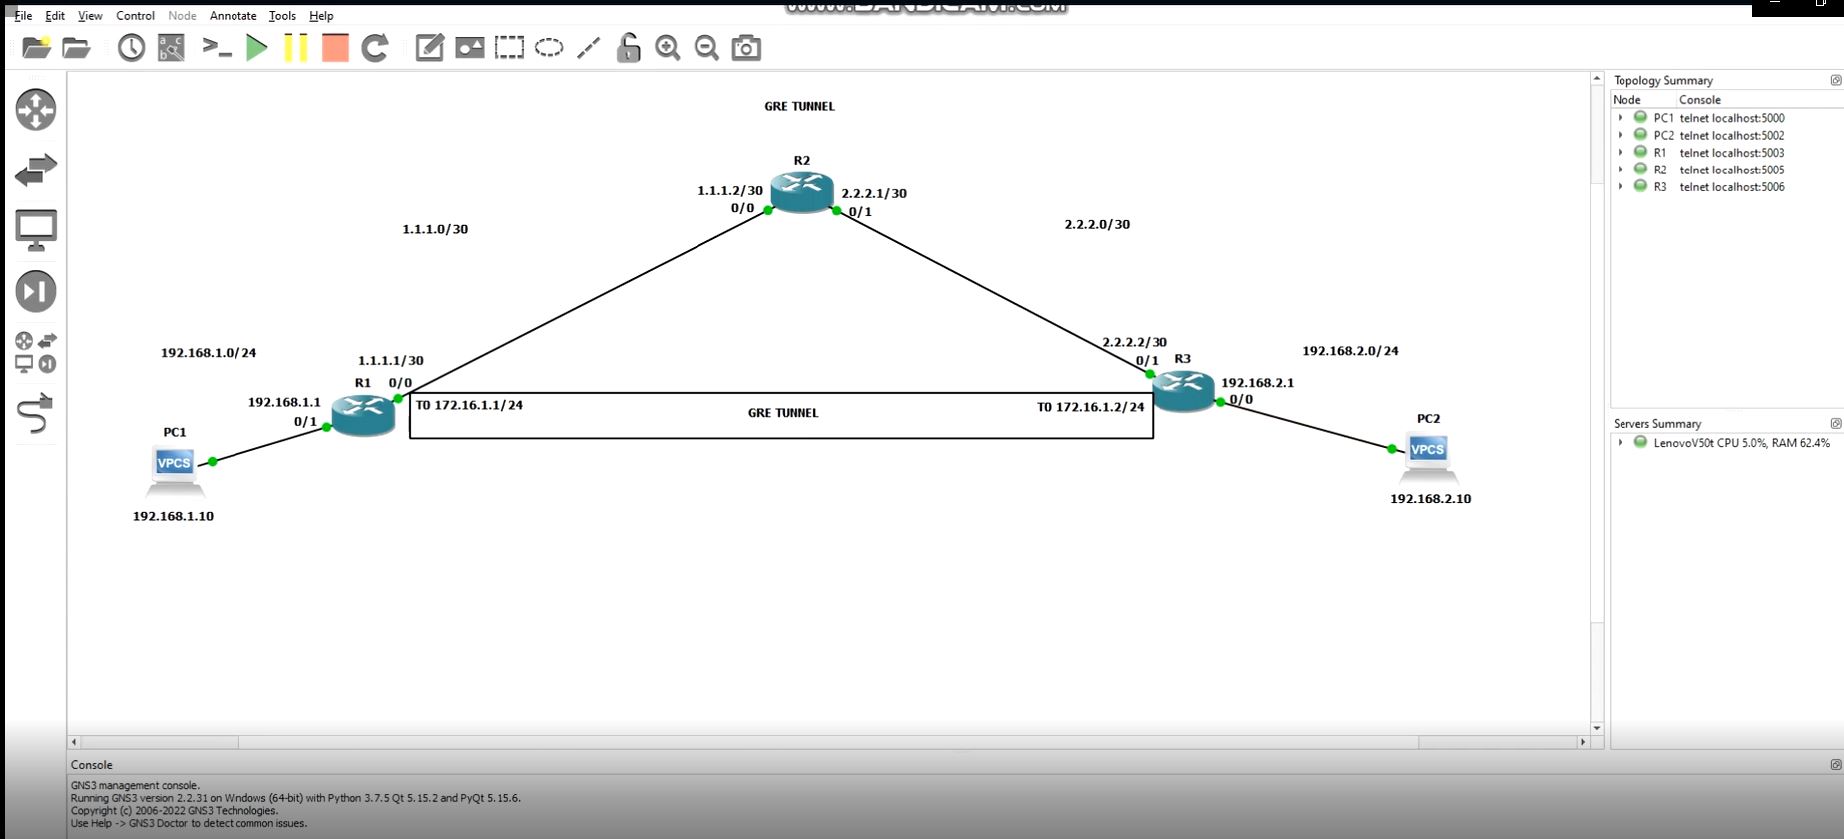 How to configure gre tunnel on cisco router